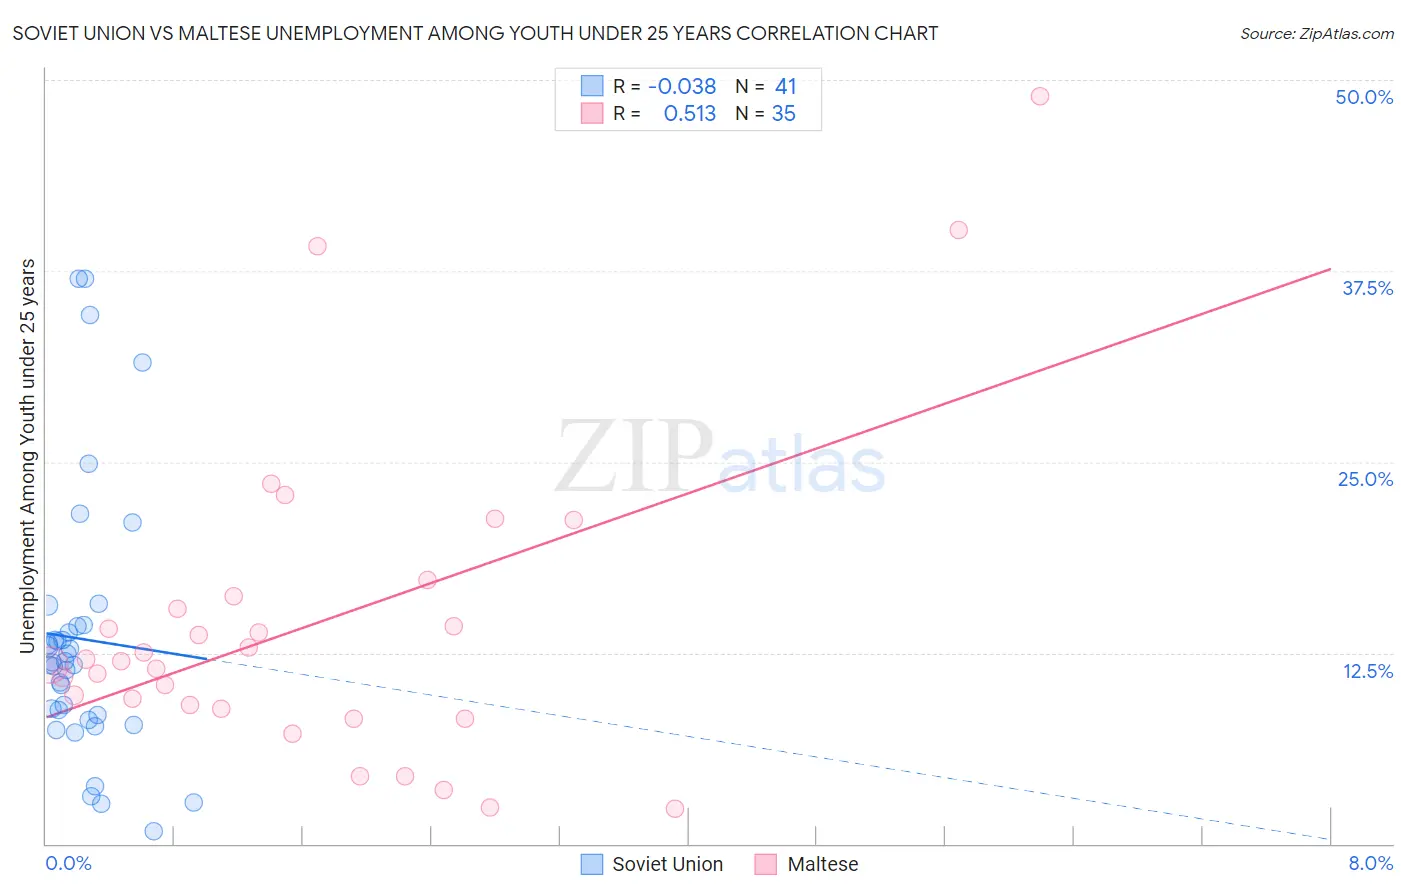 Soviet Union vs Maltese Unemployment Among Youth under 25 years